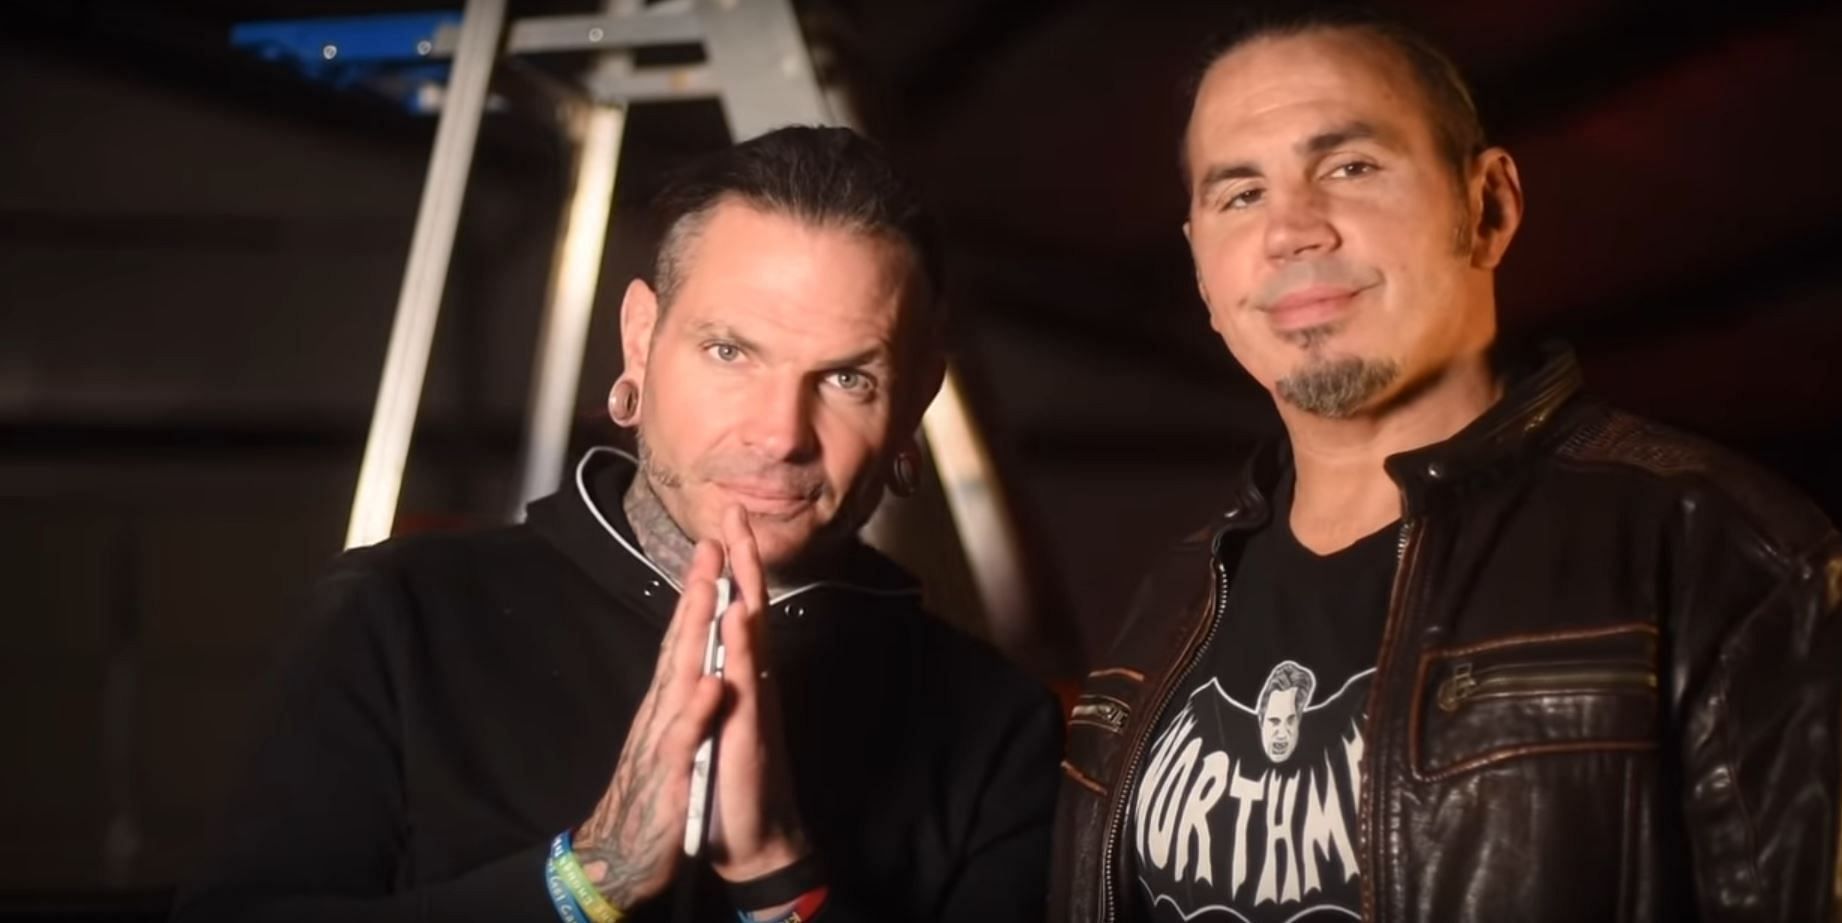 Could we see The Hardy Boyz reunion in AEW?